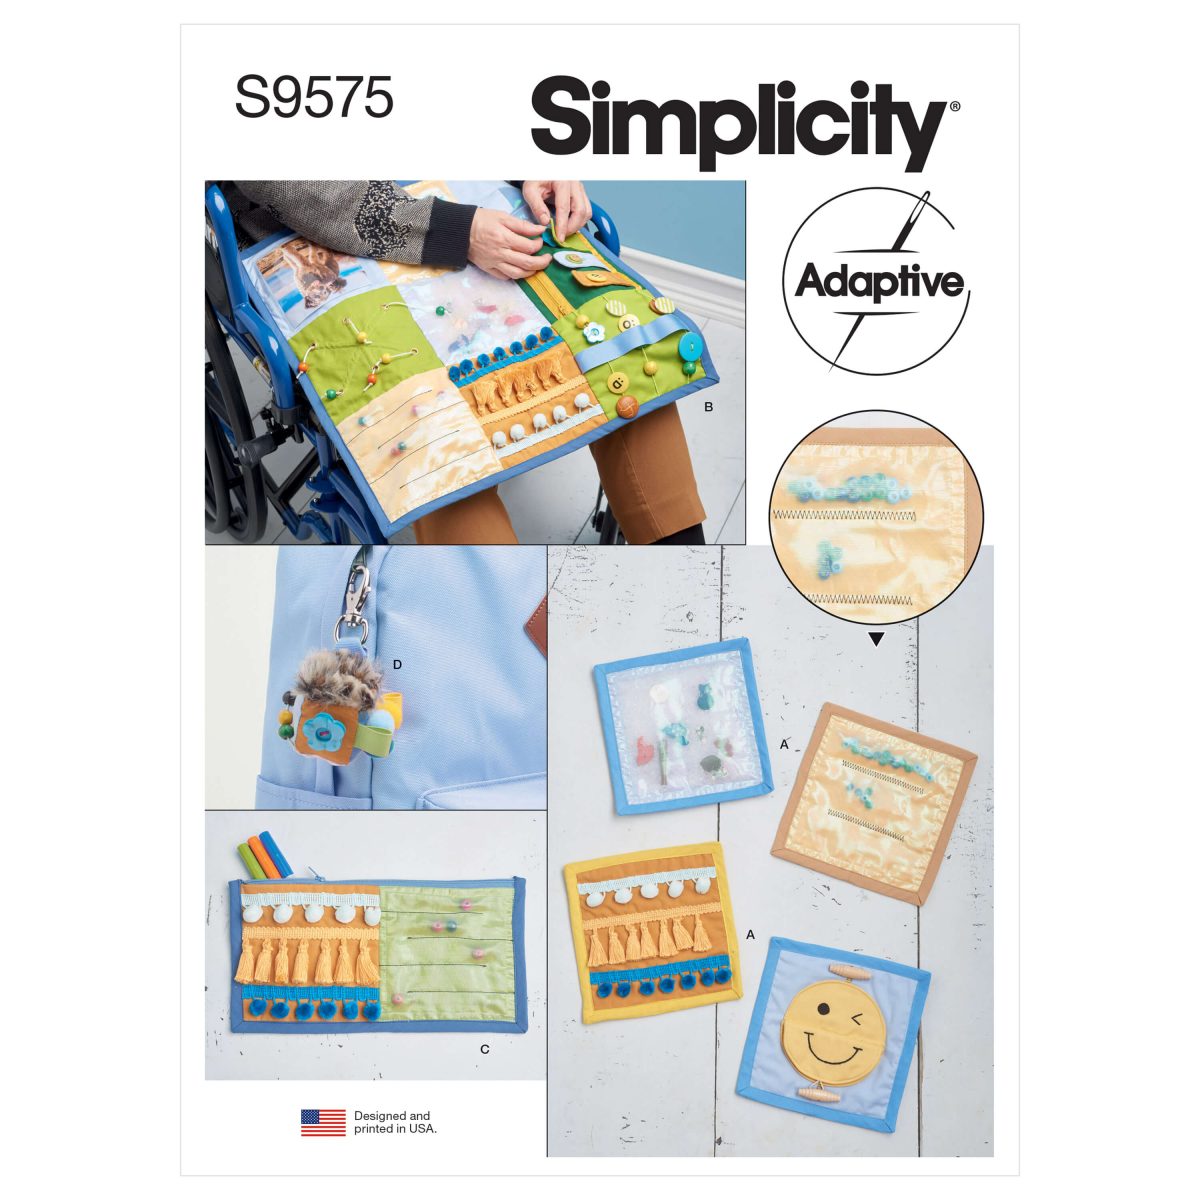 Simplicity Sewing Pattern S9575Fidget Pages, Quilt, Zipper Case and Key Fob